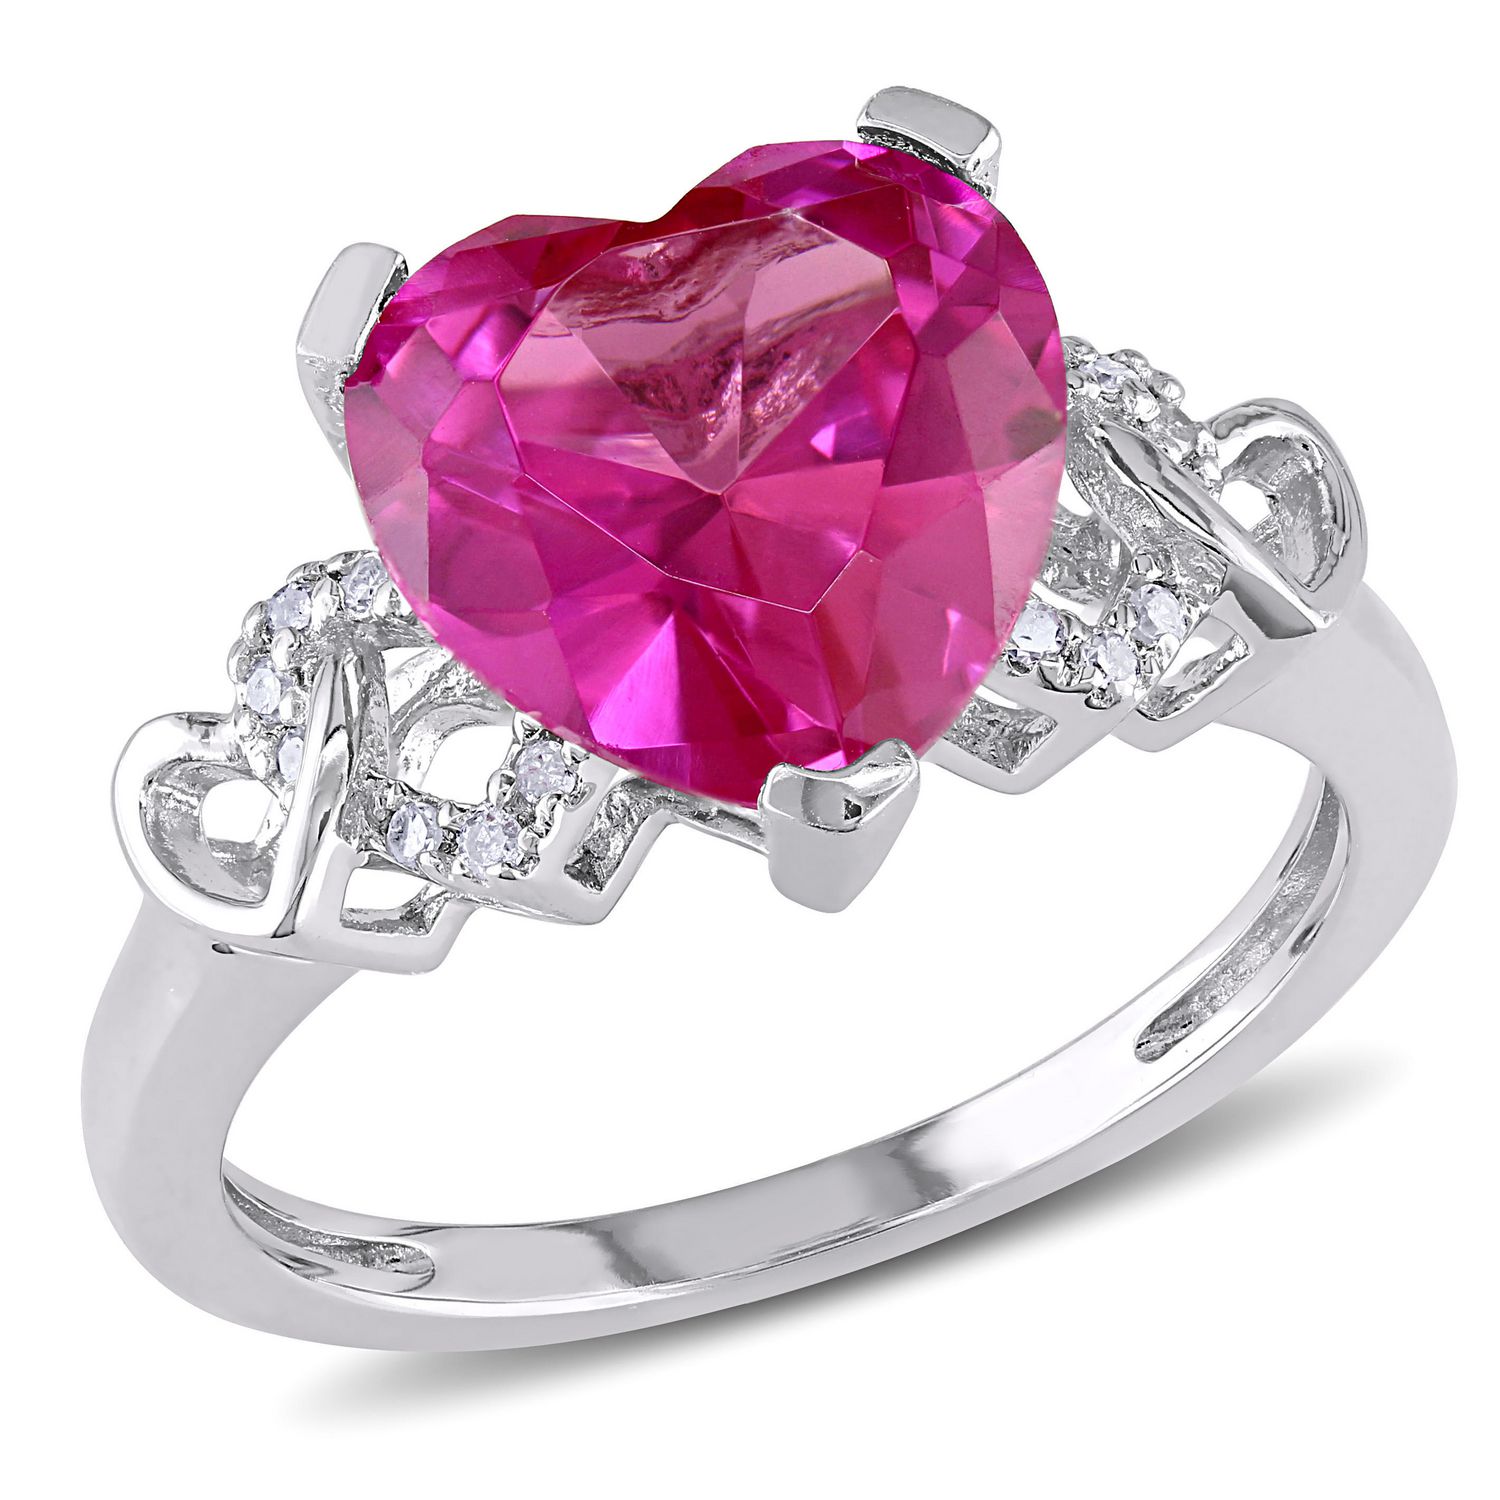 Tangelo 4-1/5 Carat T.G.W. Created Pink Sapphire And Diamond-Accent